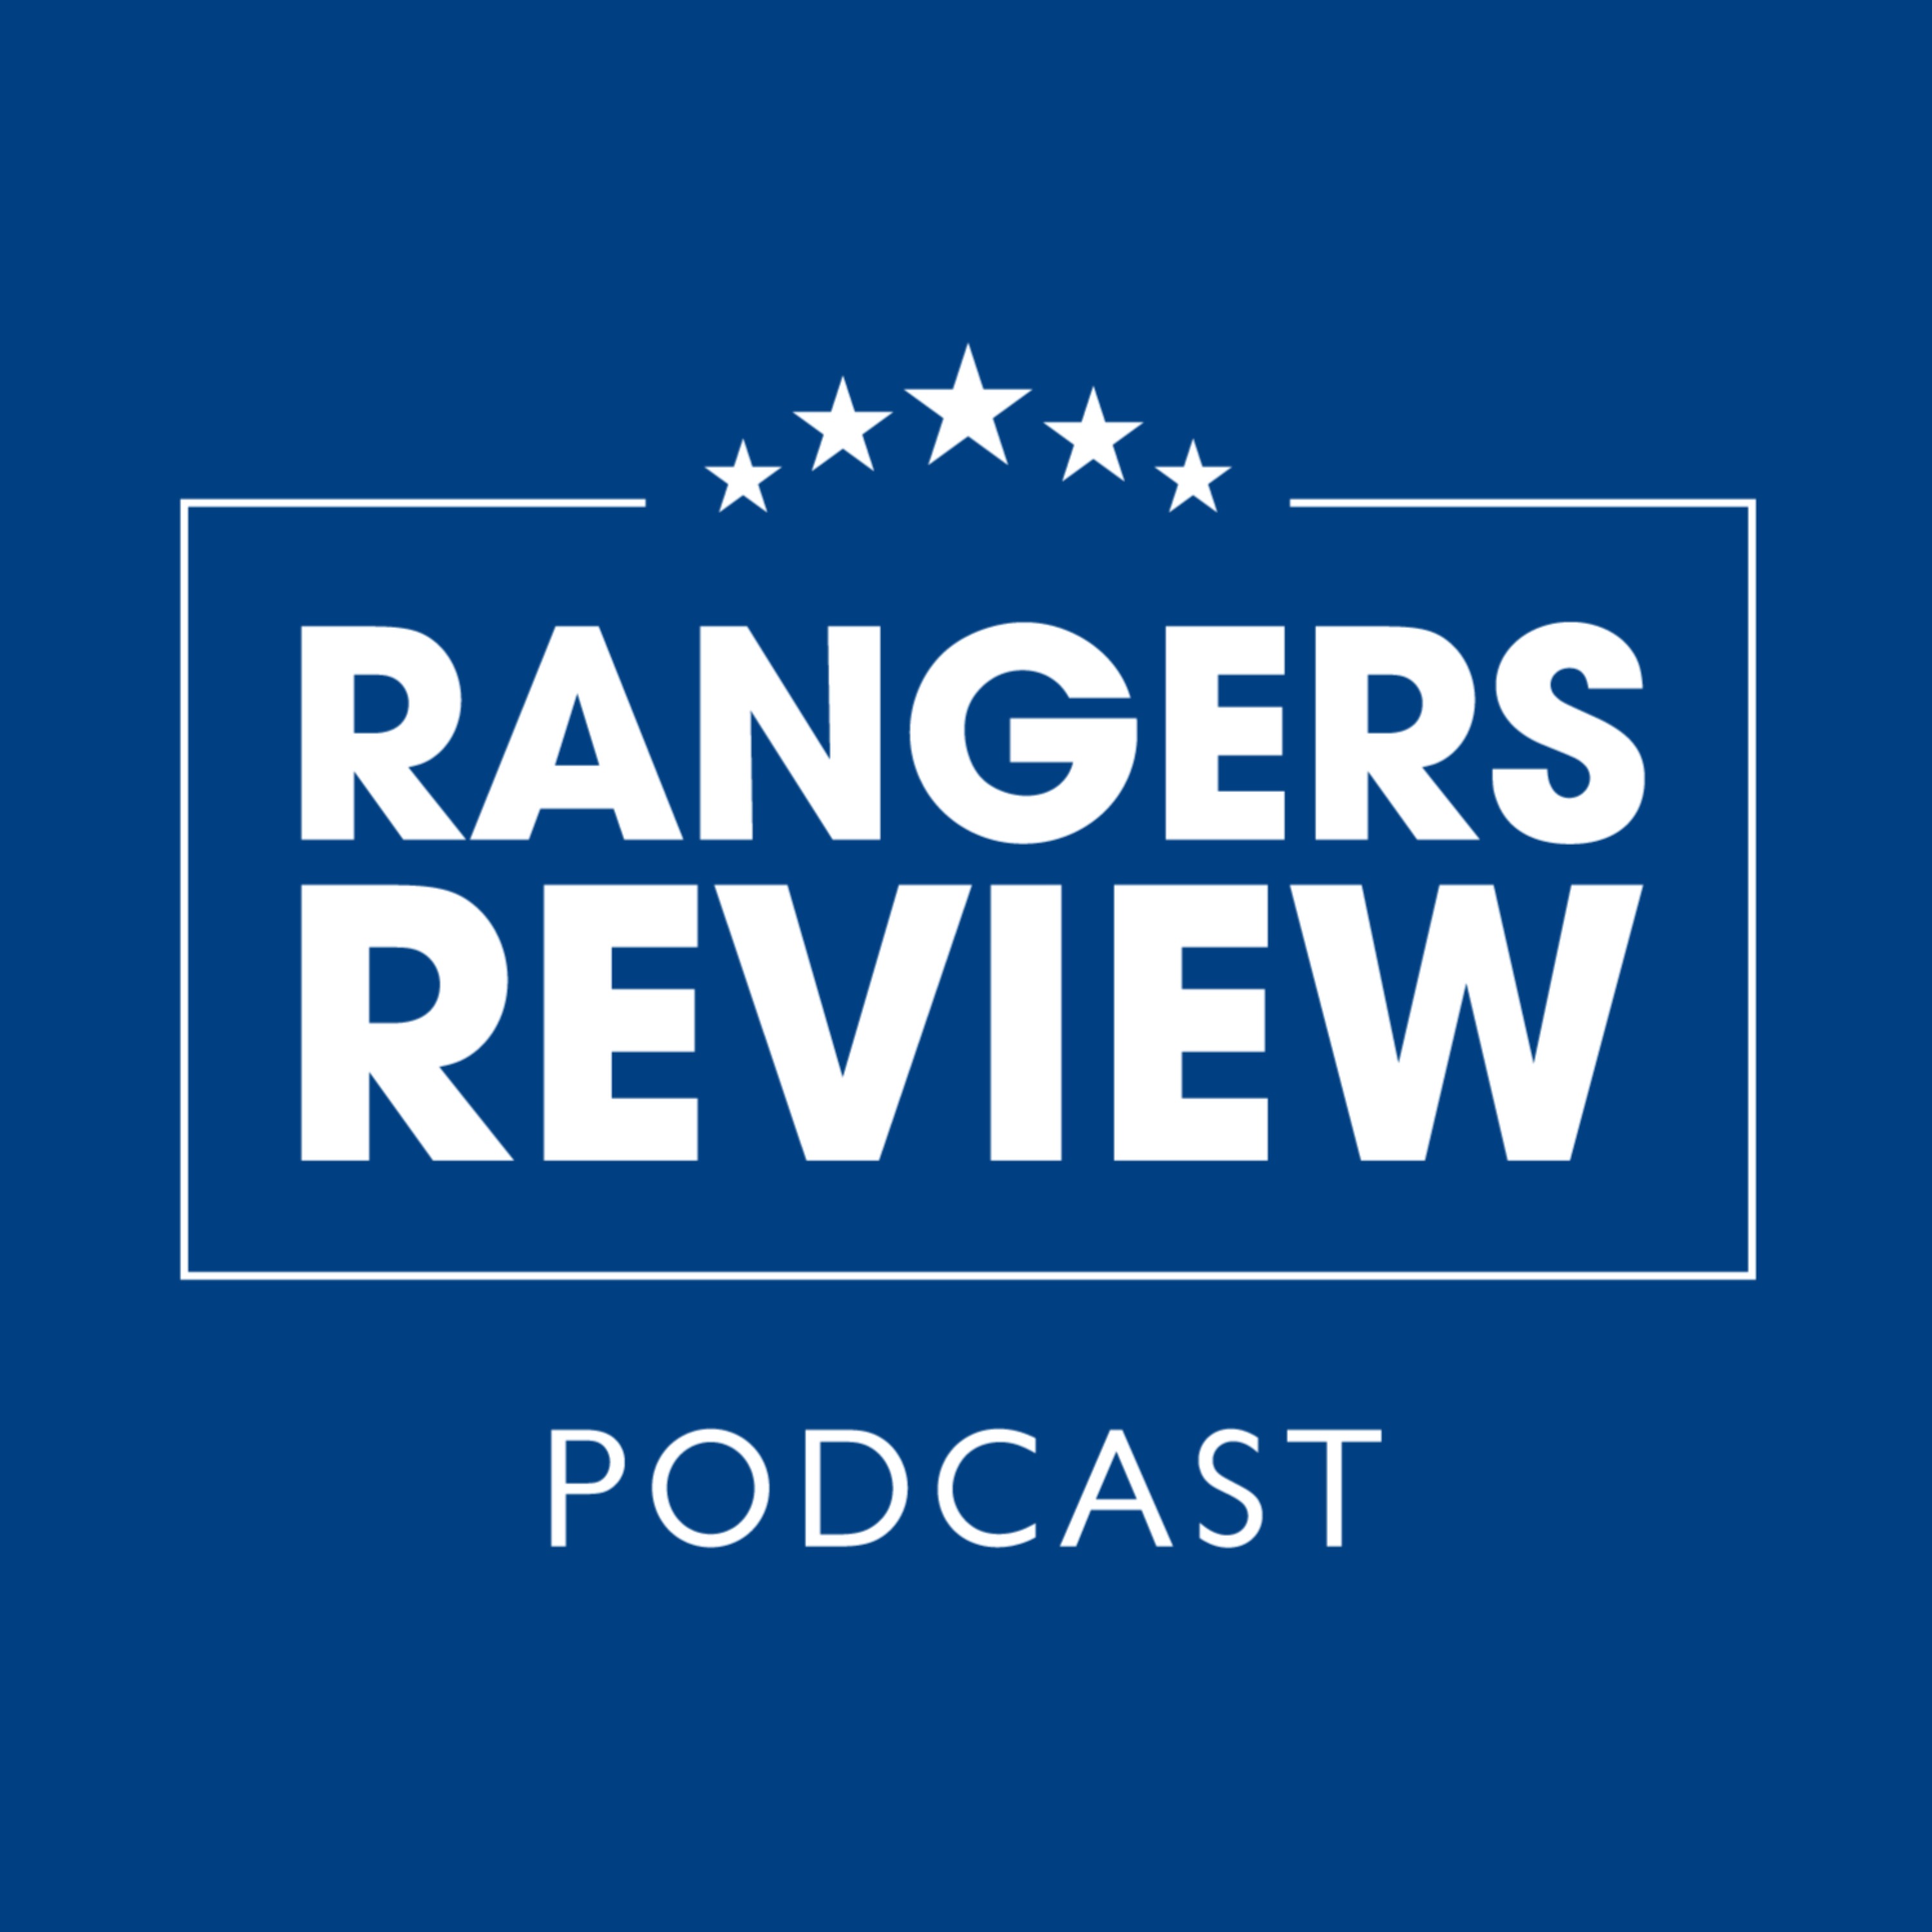 Hibs v Rangers preview | Could Ridvan return to squad?